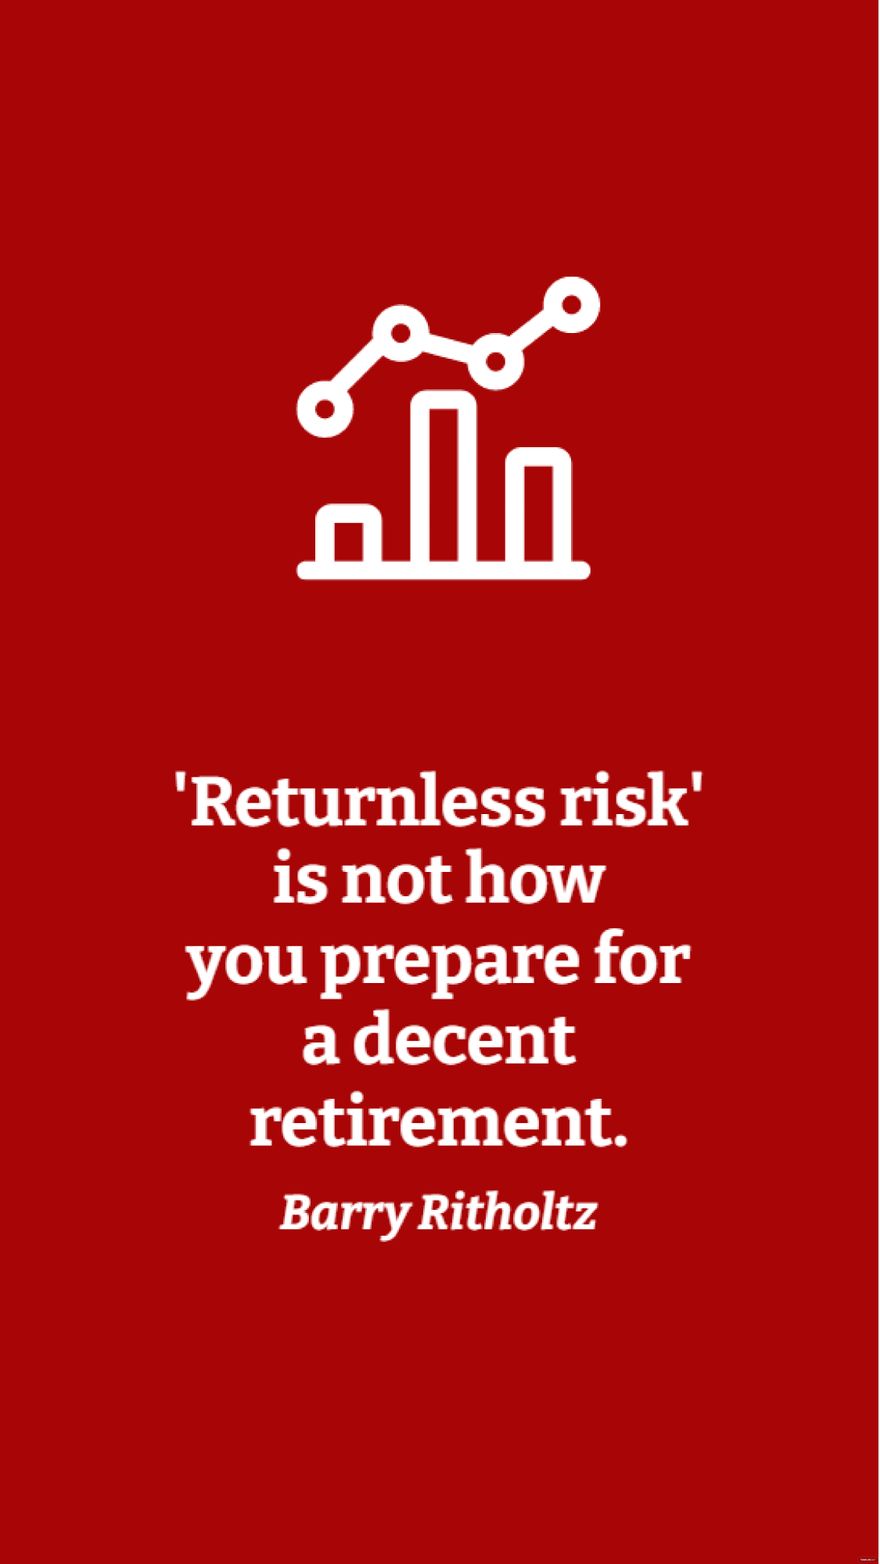 Free Barry Ritholtz - 'Returnless risk' is not how you prepare for a decent retirement. in JPG